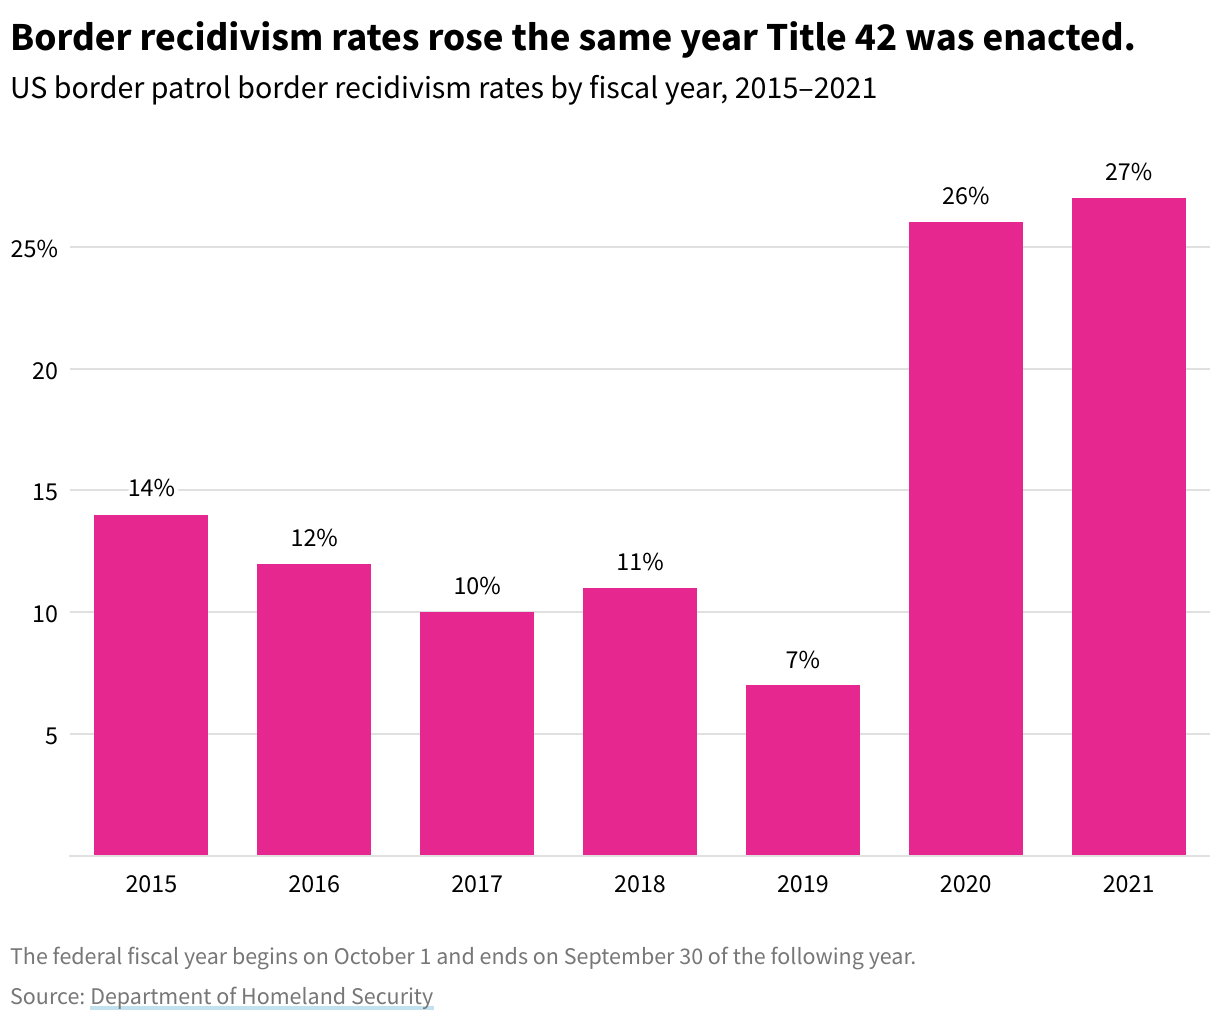 Bar chart showing the border recidivism rate from 2015 to 2021. The rates: 2015 (15%), 2016 (12%), 2017 (10%), 2018 (11%), 2019 (7%), 2020 (26%), and 2021 (27%). 